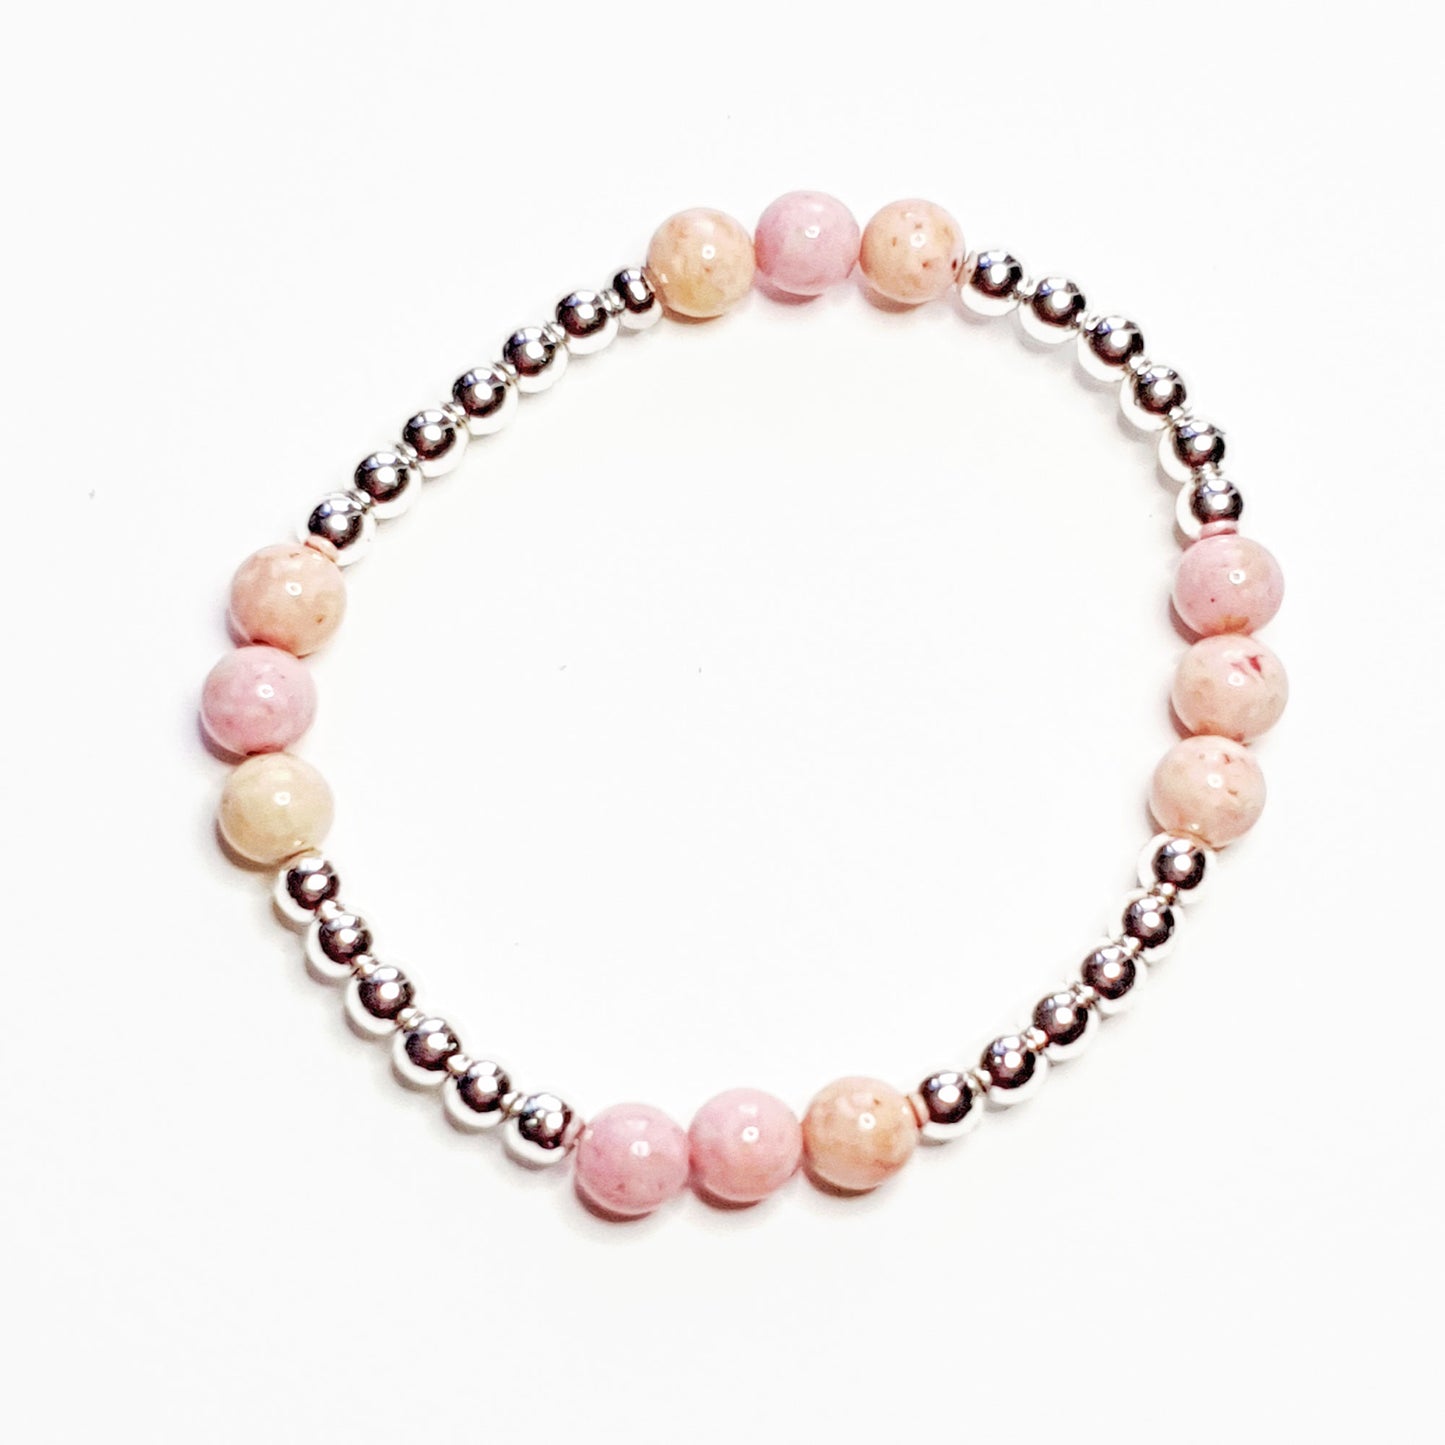 Hematine & fossil ball bracelet in pale pink